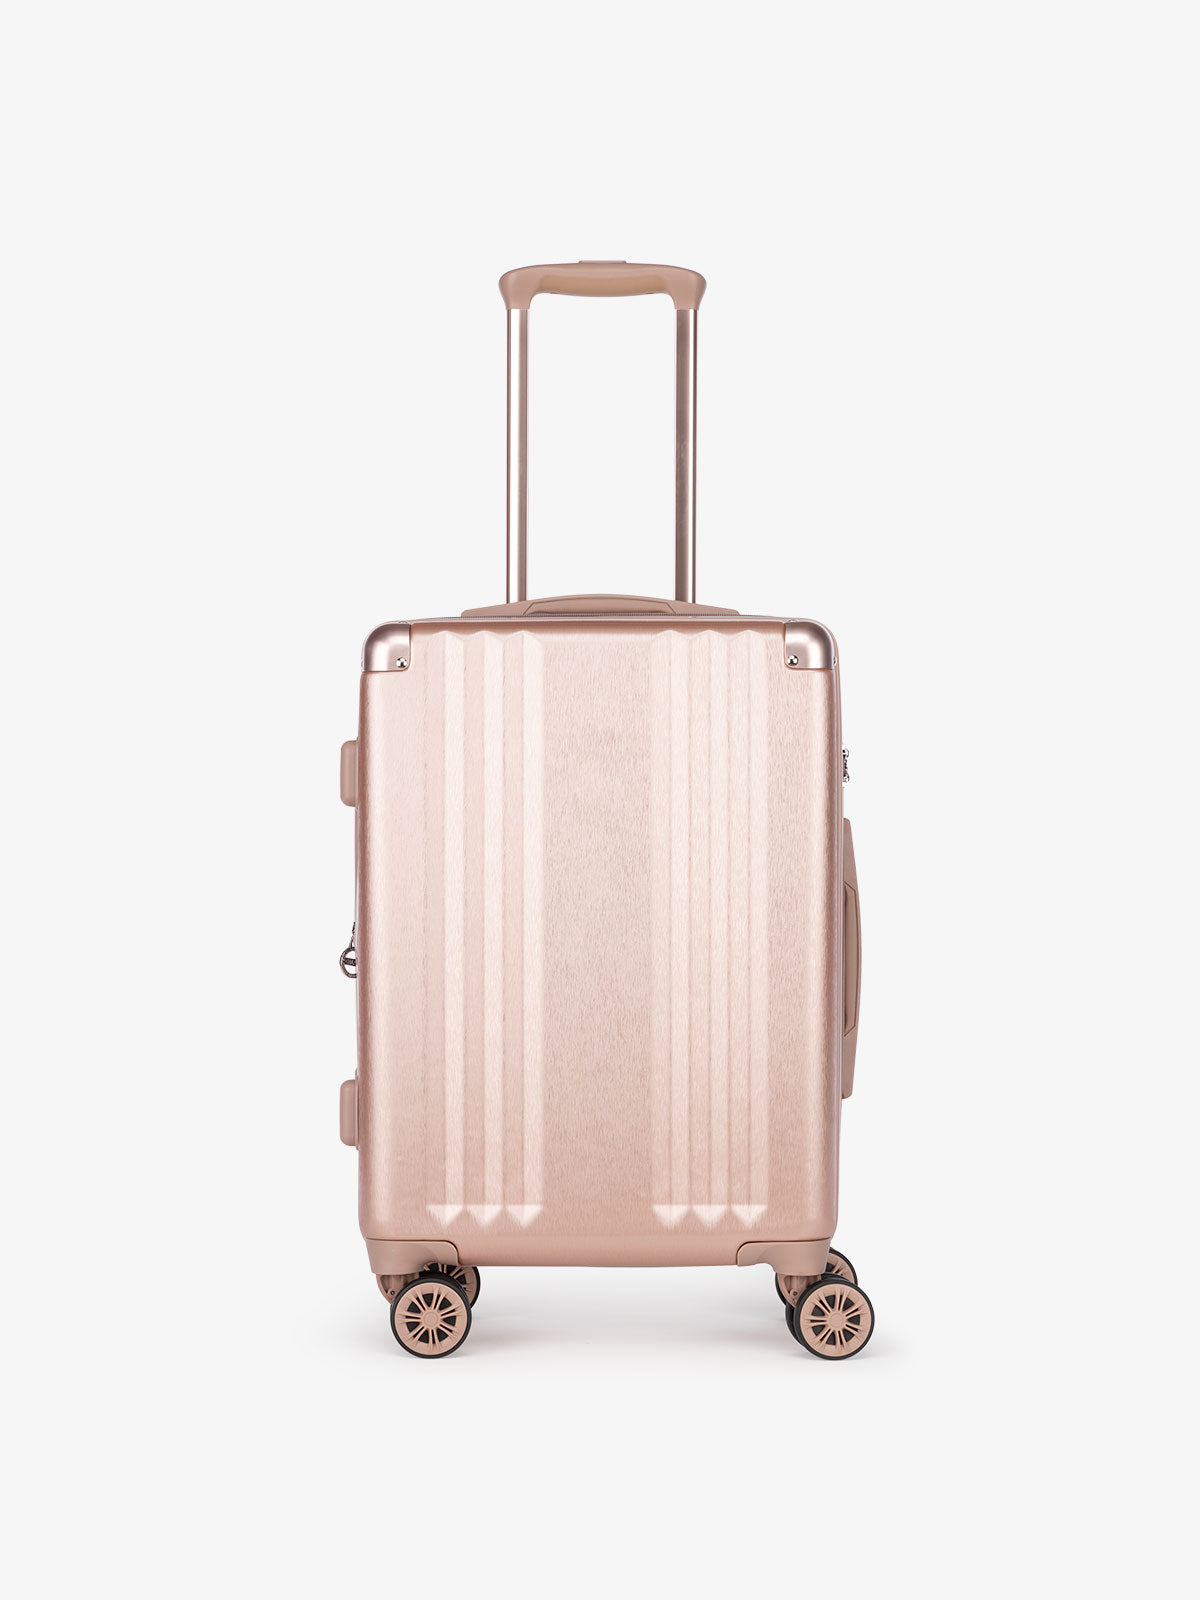 CALPAK Ambeur: lightweight cute rose gold carry on luggage part of 2 piece set